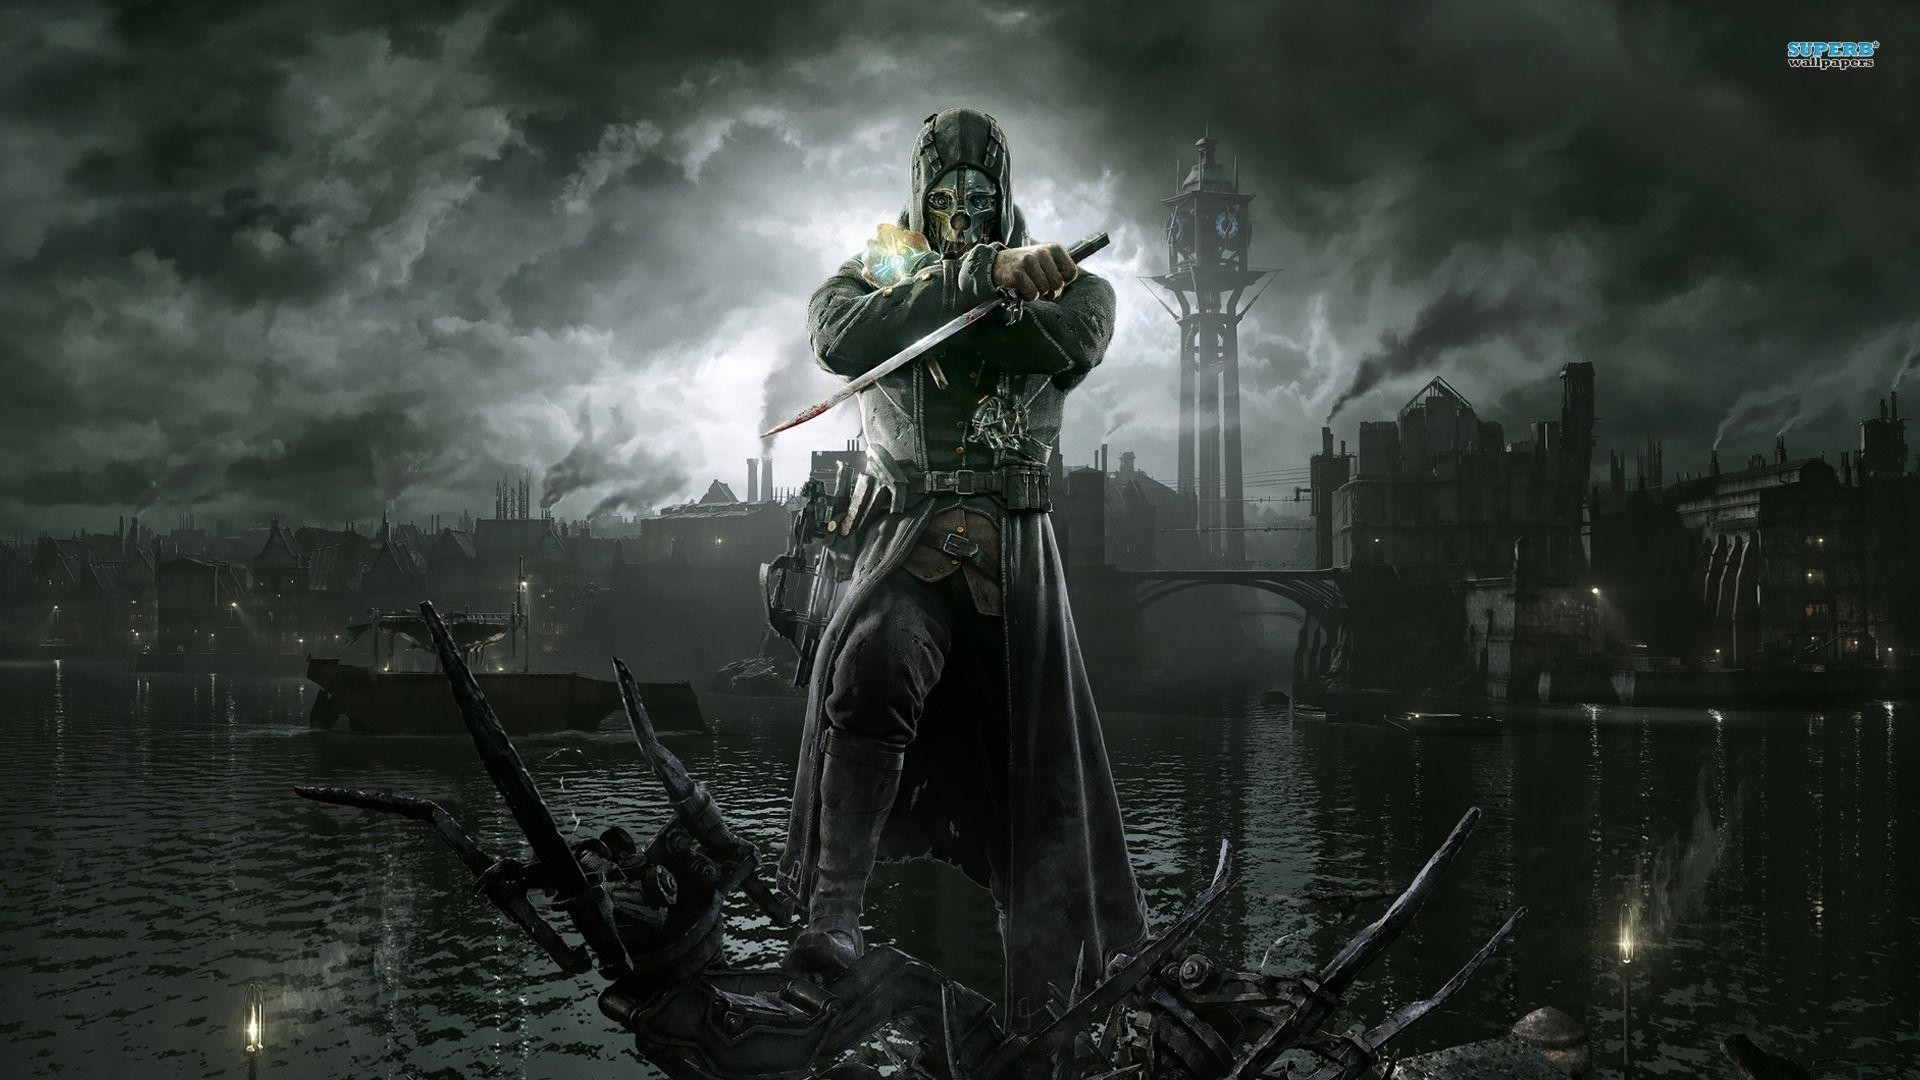 1920x1080 Dishonored Wallpapers, 41 Desktop Images of Dishonored .